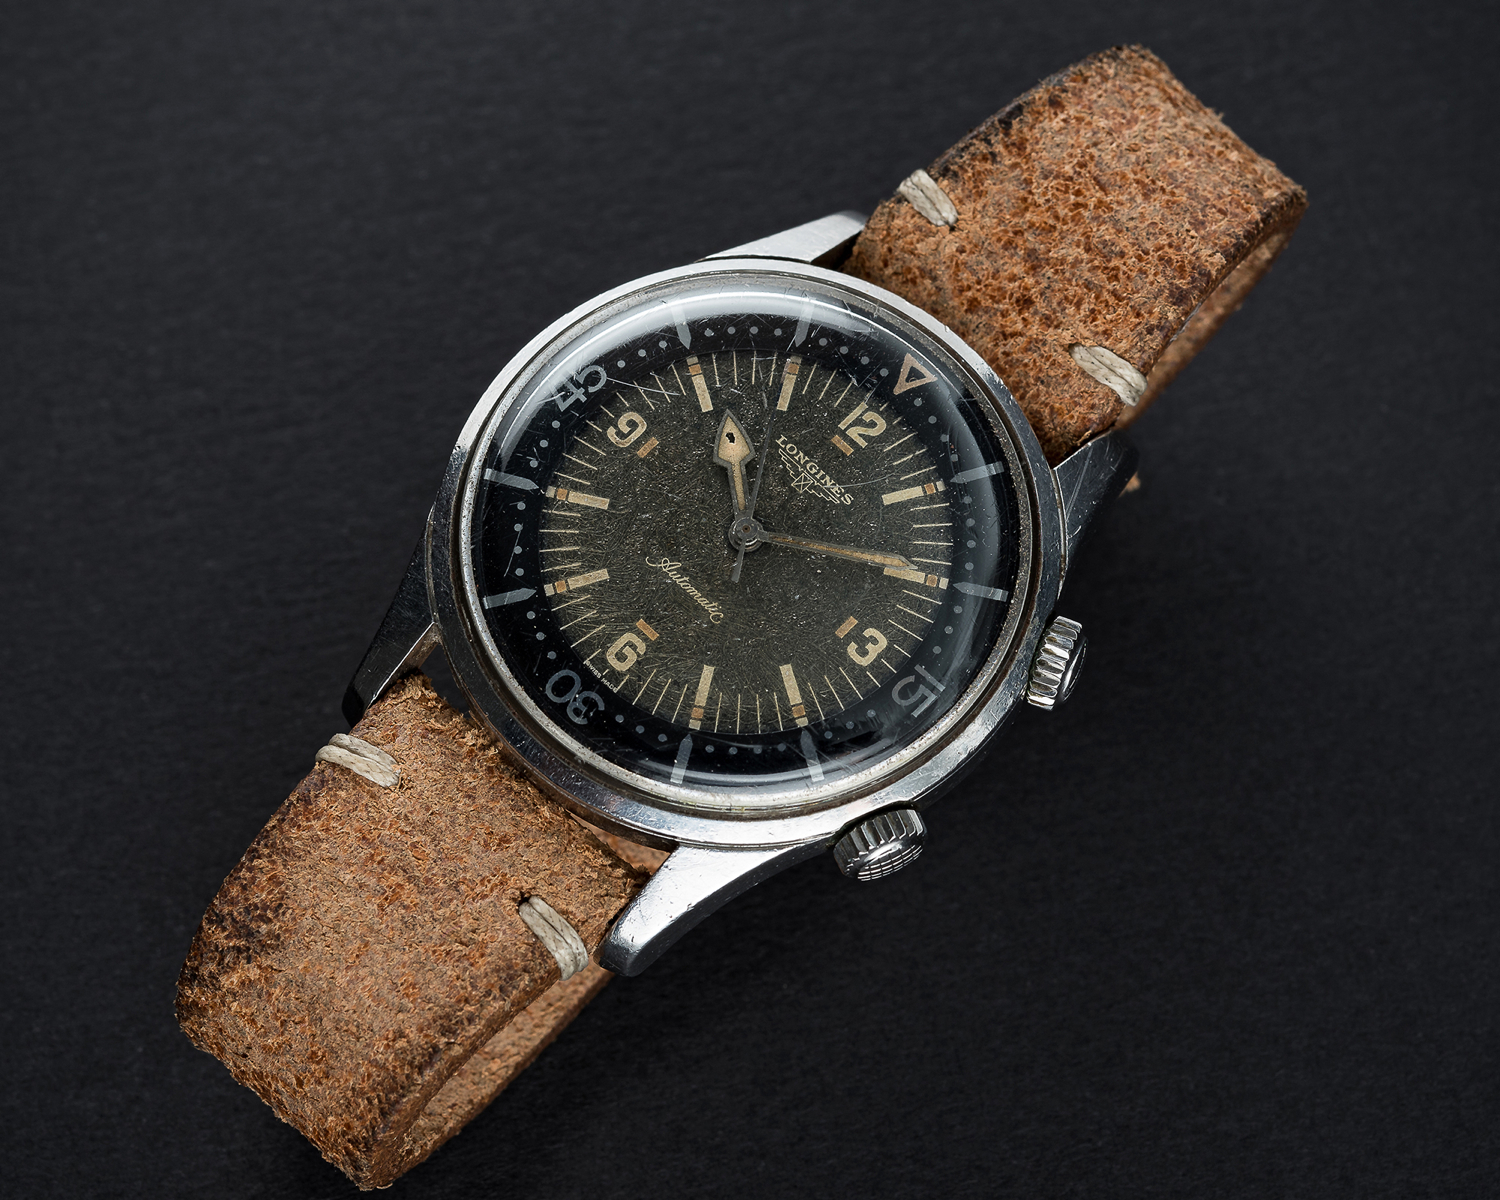 A VERY RARE GENTLEMAN'S STAINLESS STEEL LONGINES DIVERS WRIST WATCH CIRCA 1962, REF. 7042-3 WITH "